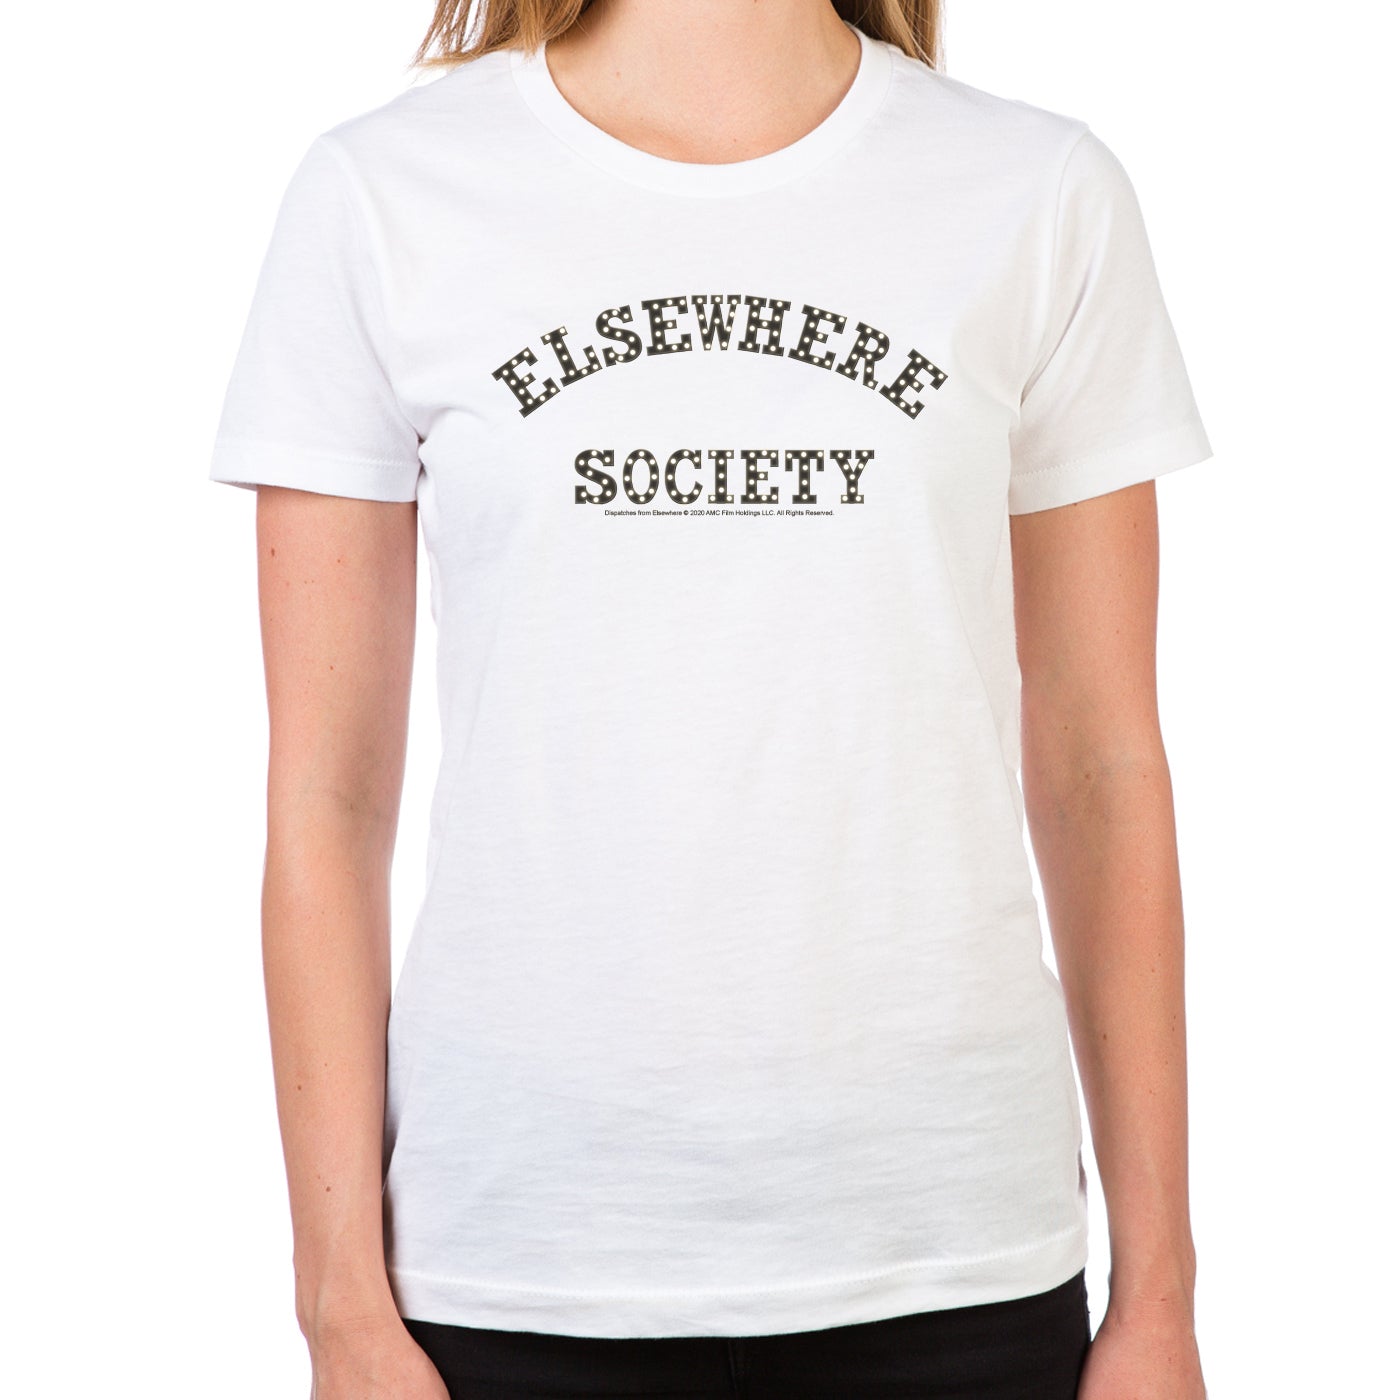 Dispatches From Elsewhere Elsewhere Society Women's T-Shirt